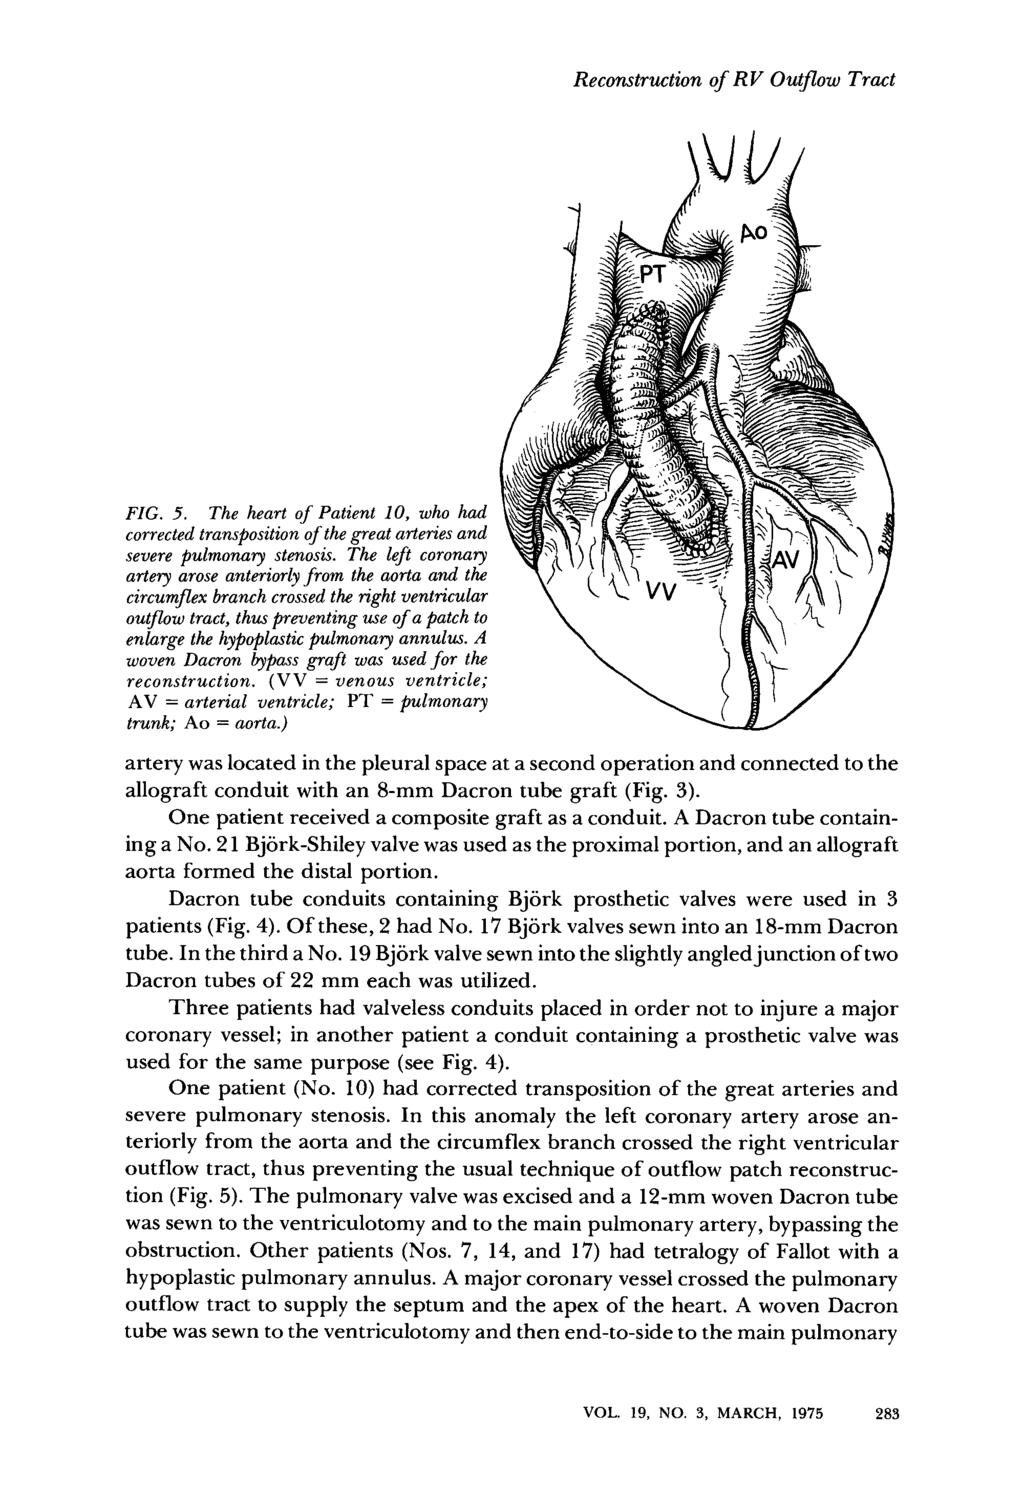 Reconstruction of RV Outflow Tract FIG. 5. The heart of Patient 10, who had corrected transposition of the great arteries and severe pulmonary stenosis.